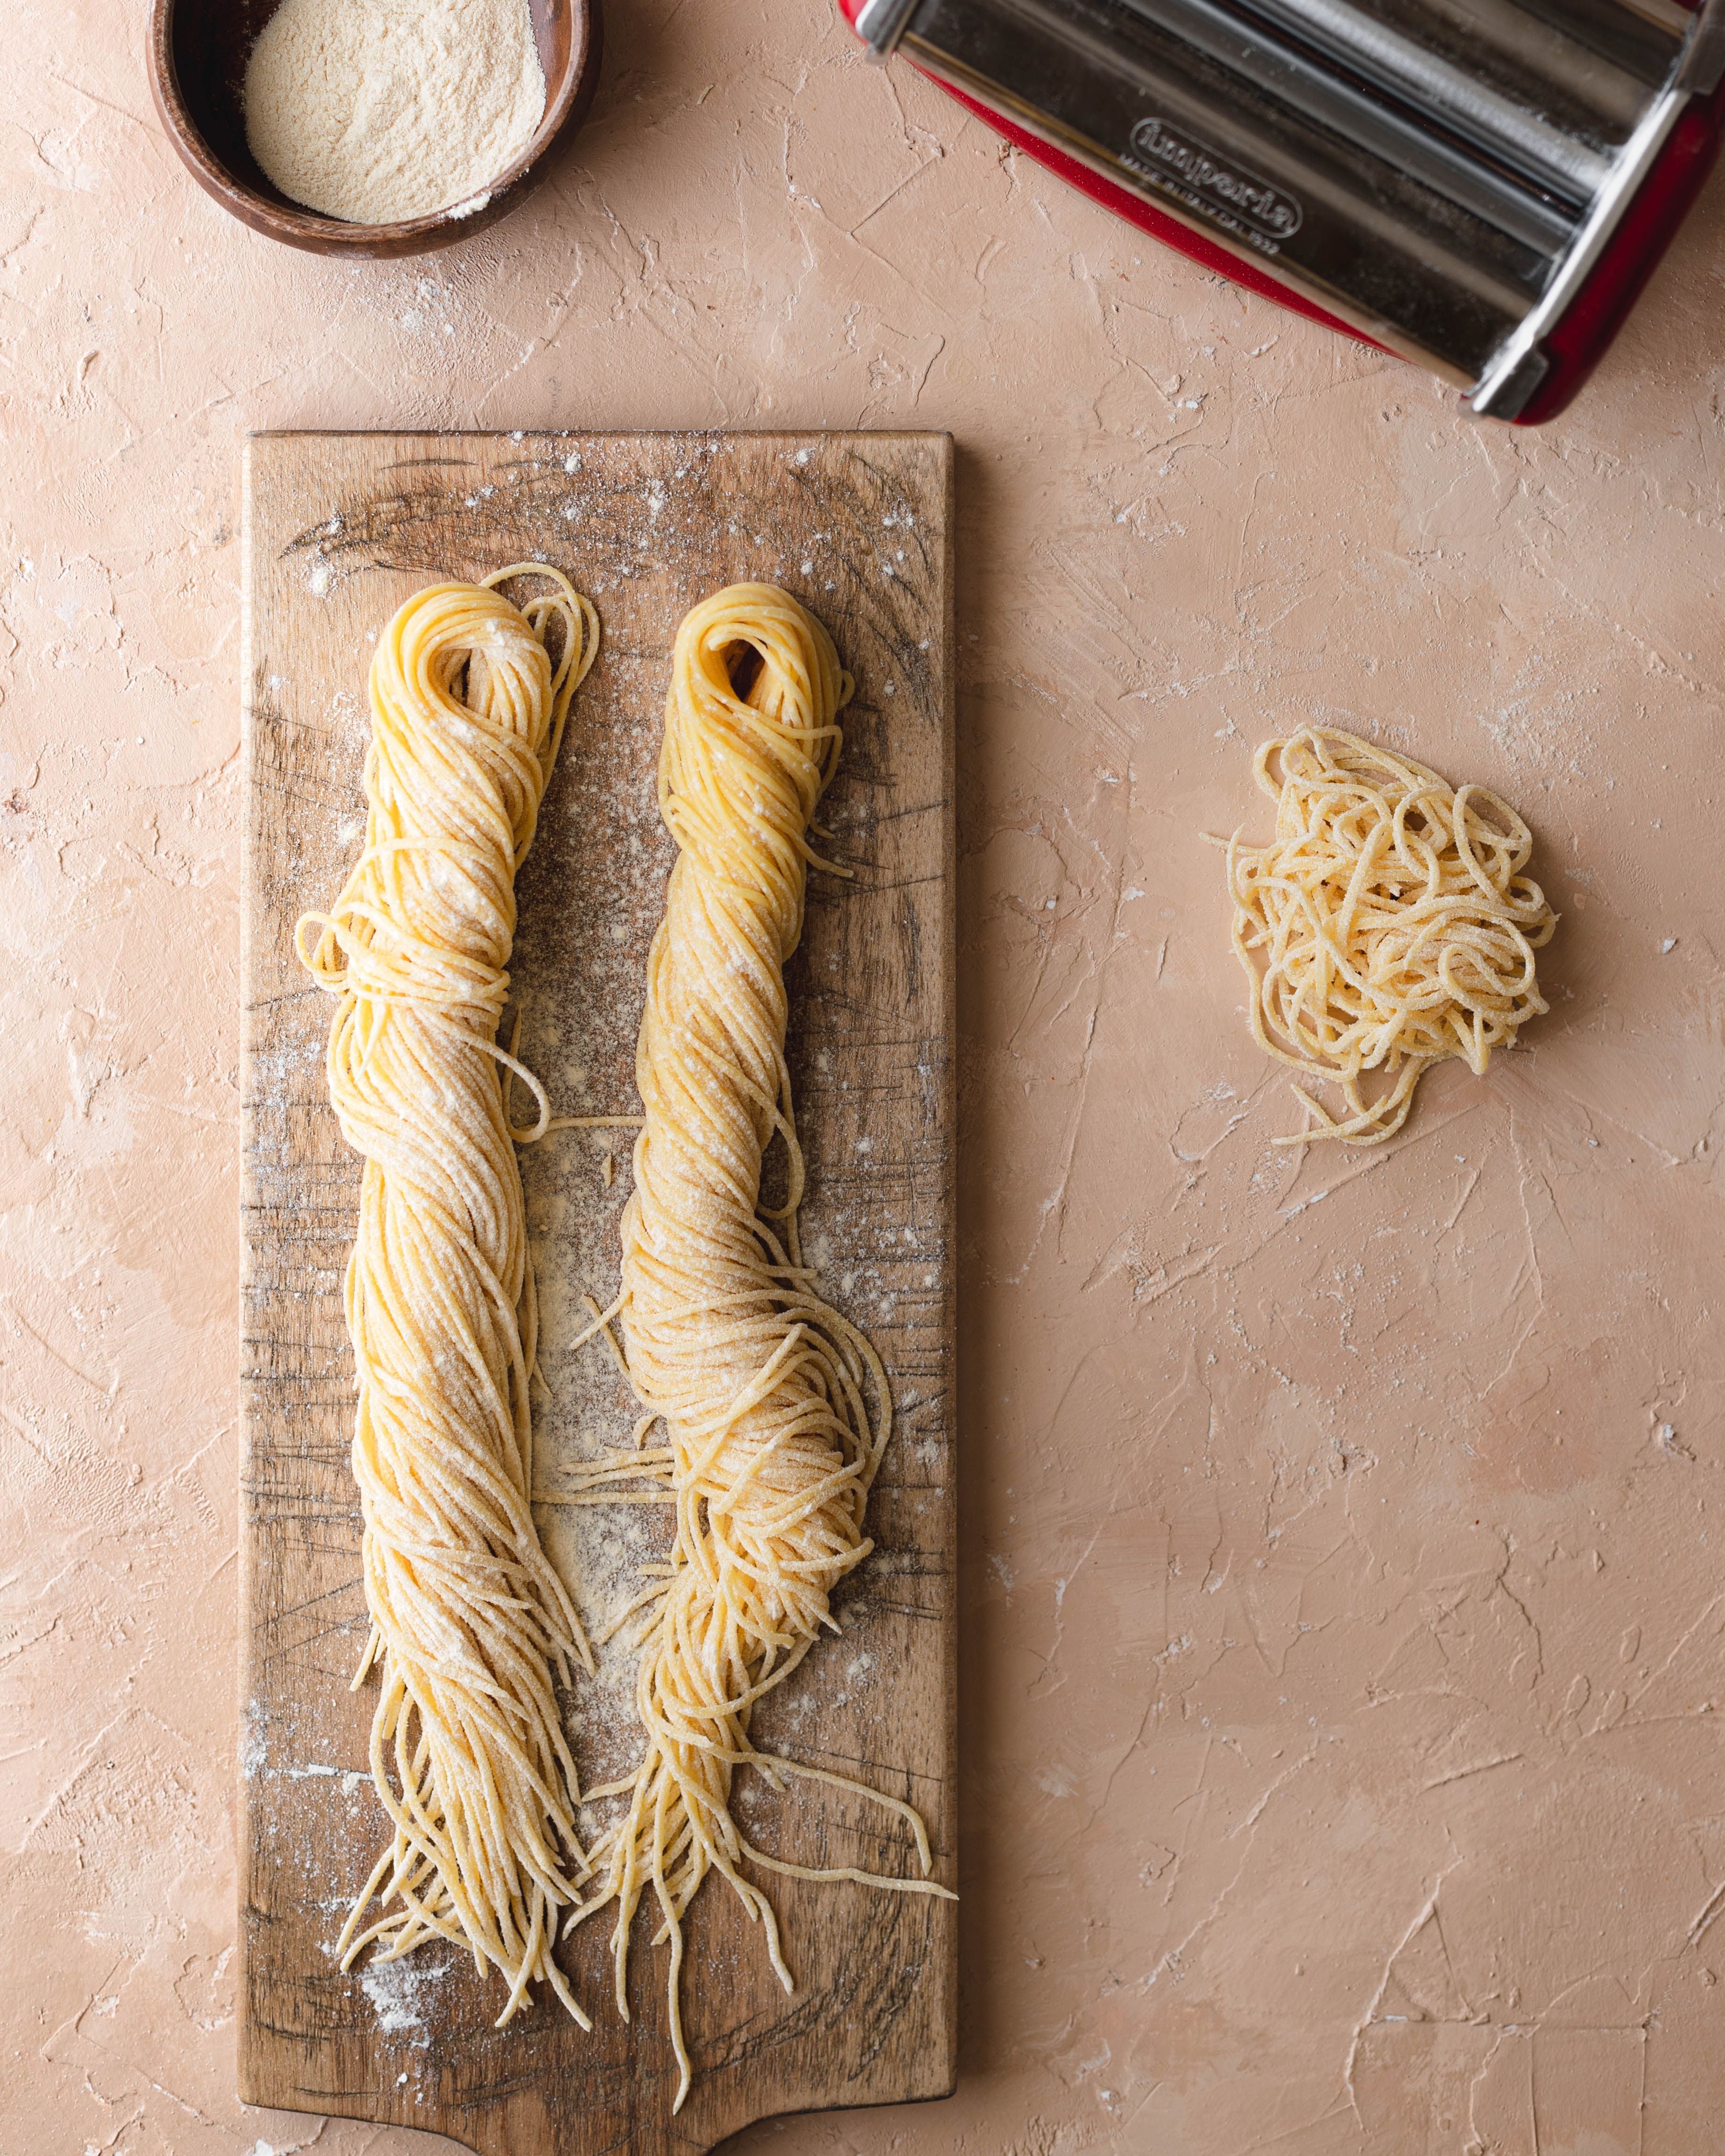 Two twists of homemade spaghetti style pasta